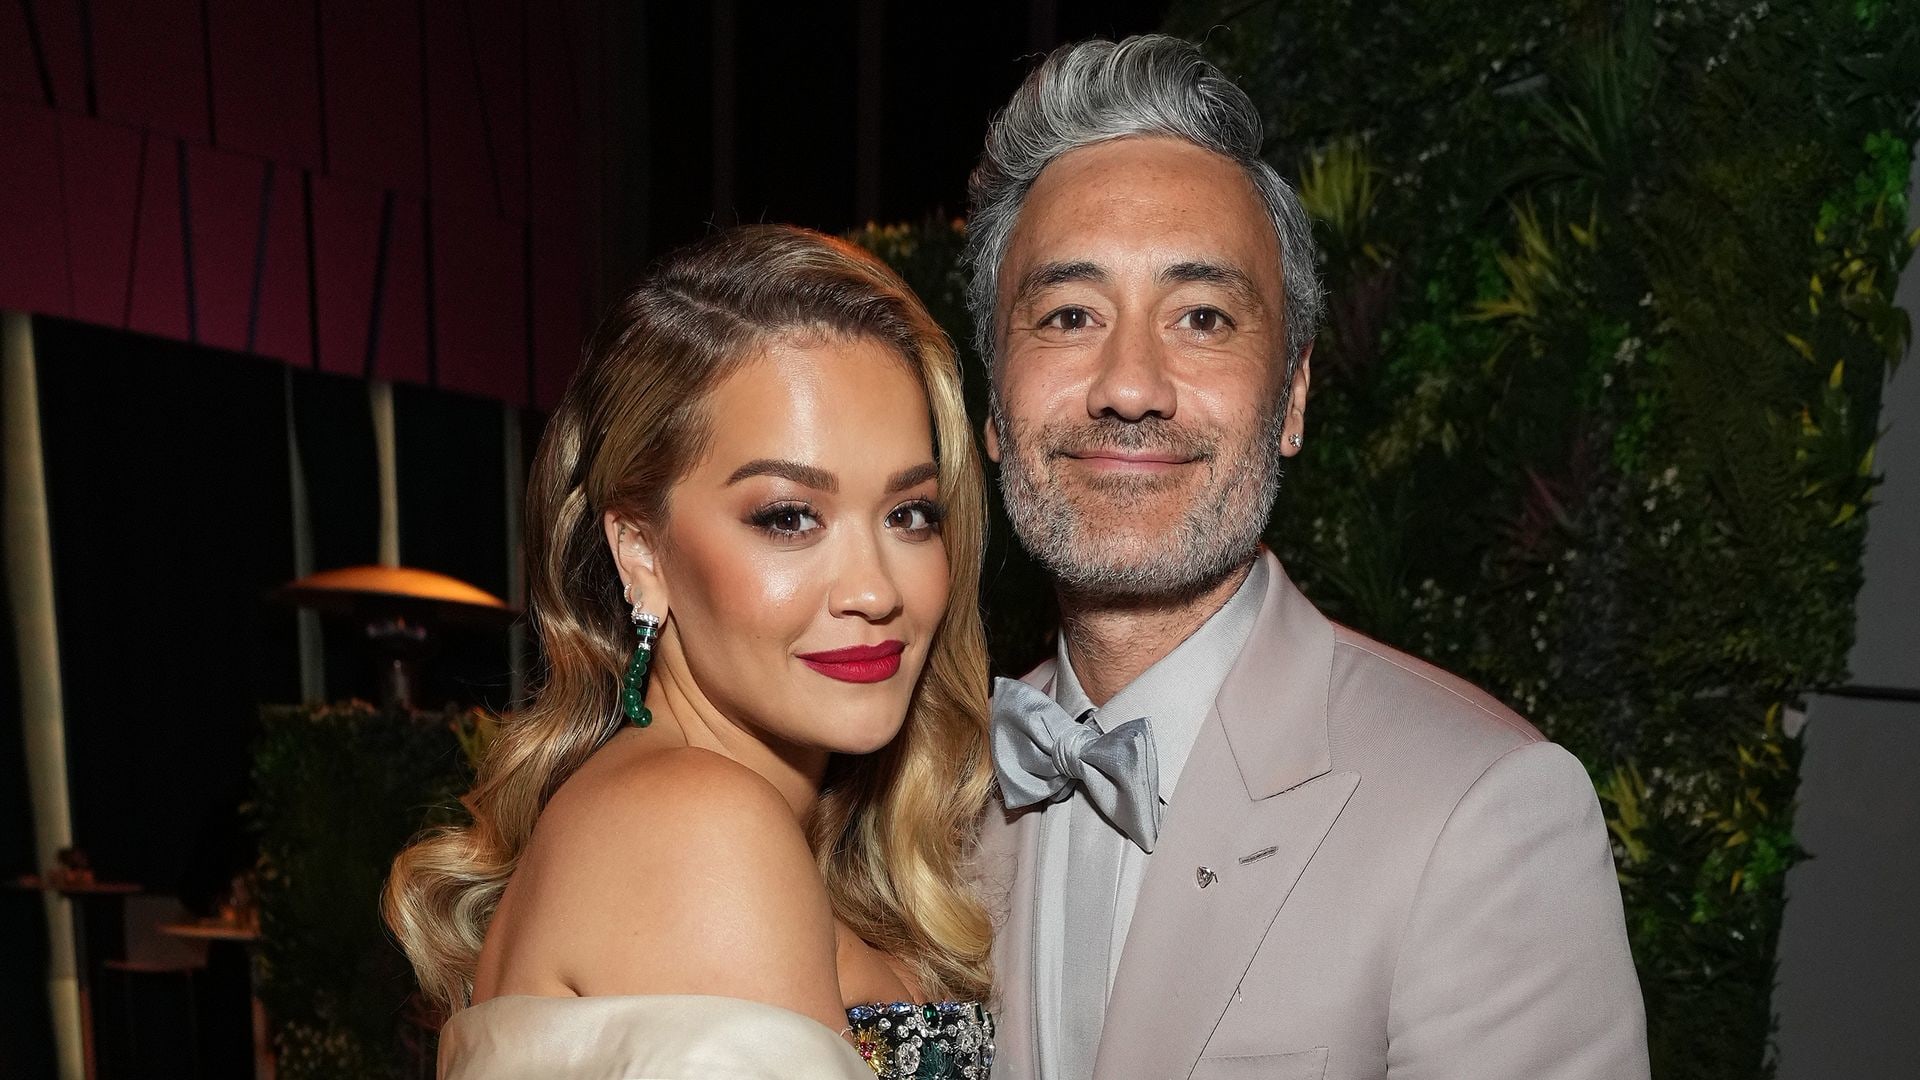 BEVERLY HILLS, CALIFORNIA - MARCH 27: Rita Ora and Taika Waititi attend the 2022 Vanity Fair Oscar Party hosted by Radhika Jones at Wallis Annenberg Center for the Performing Arts on March 27, 2022 in Beverly Hills, California. (Photo by Kevin Mazur/VF22/WireImage for Vanity Fair)